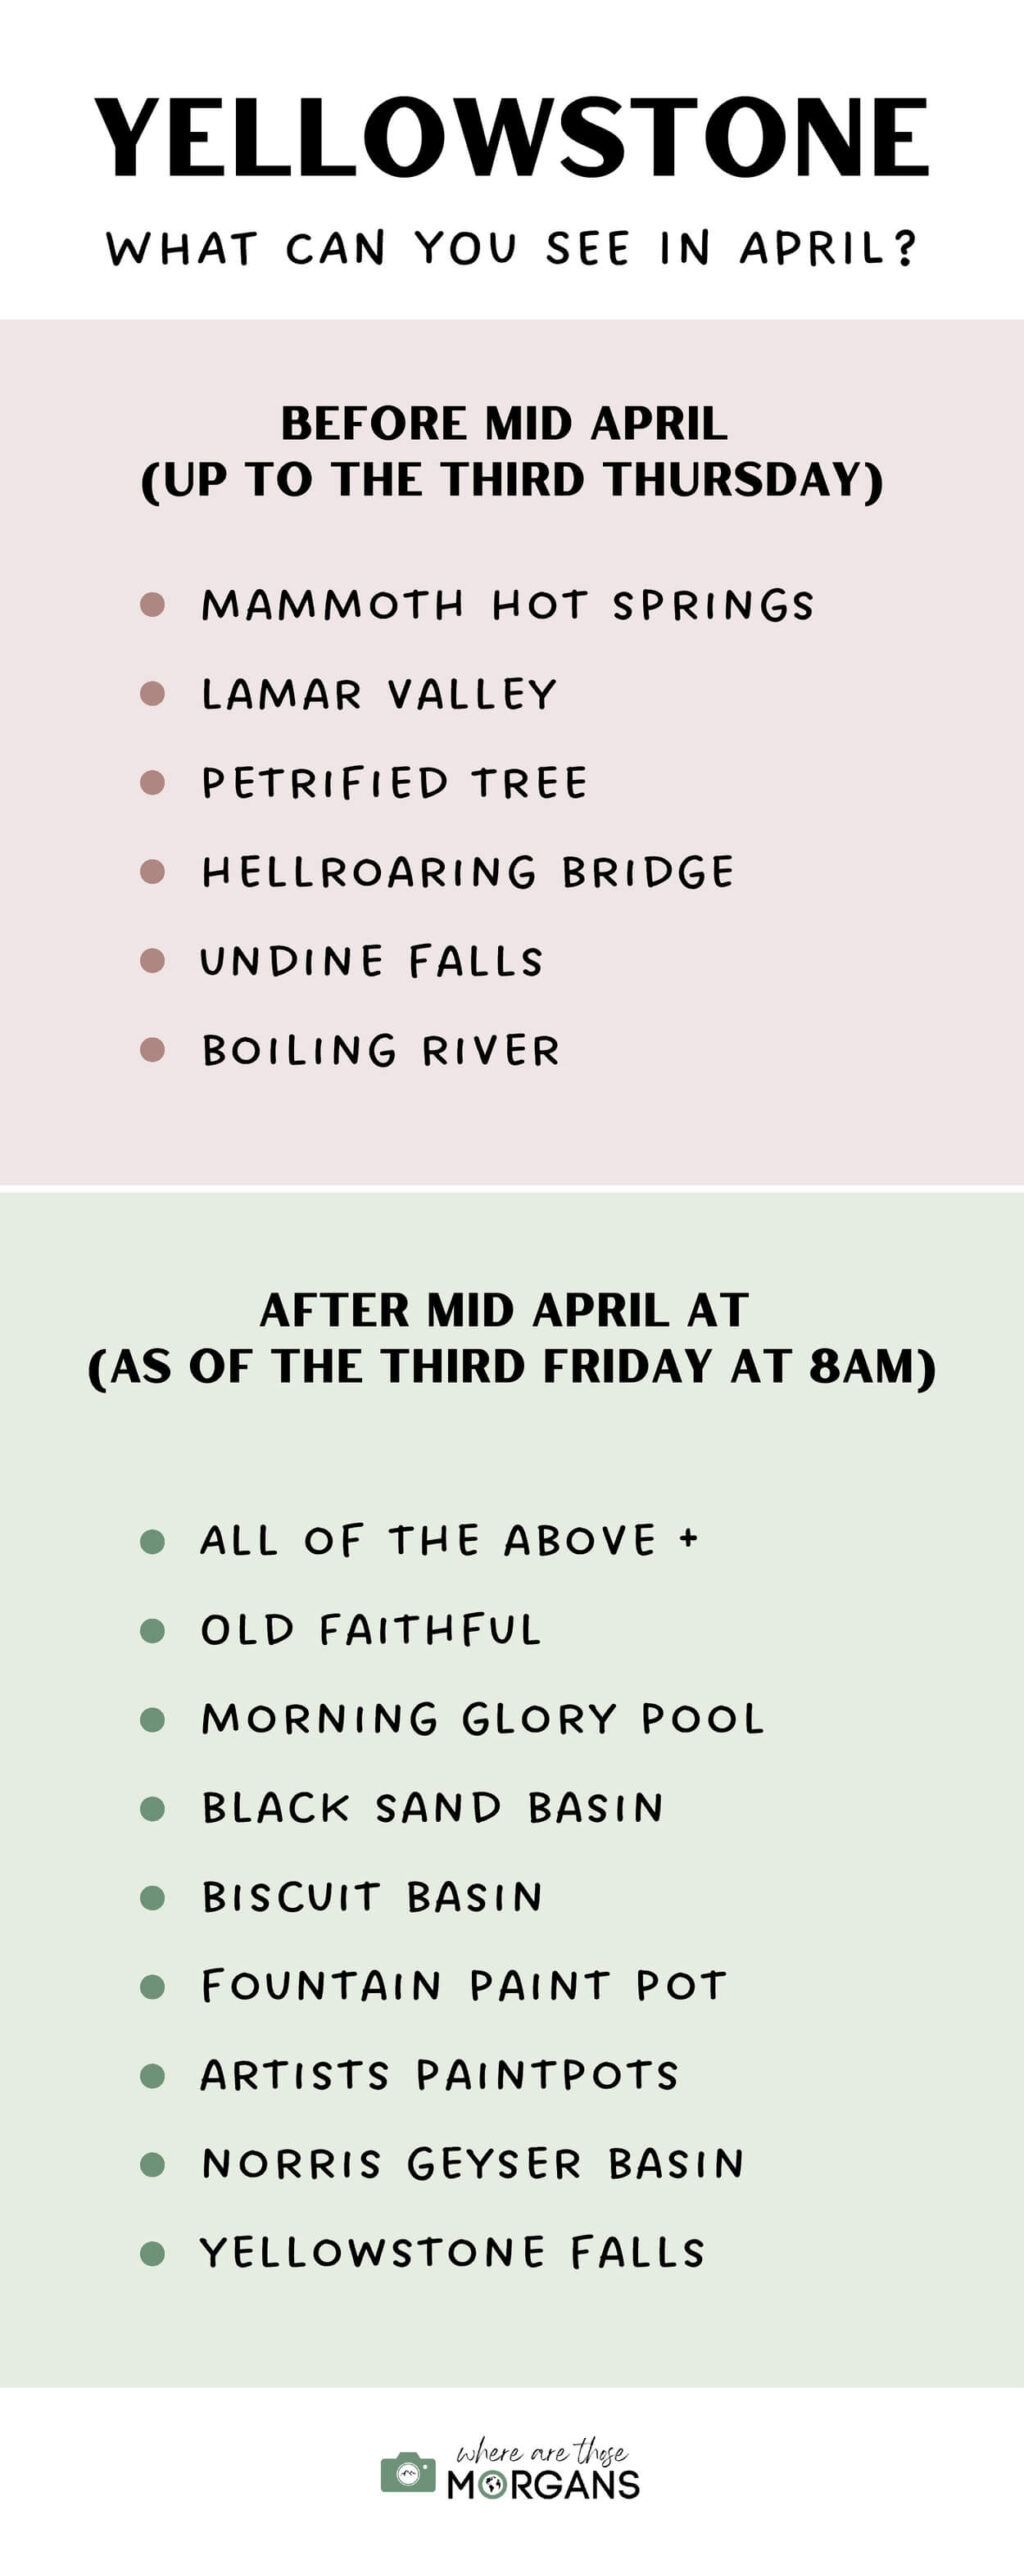 Infographic showing which Yellowstone attractions are open and closed in April with certain roads opening in the middle of the month to allow more exploring to popular landmarks